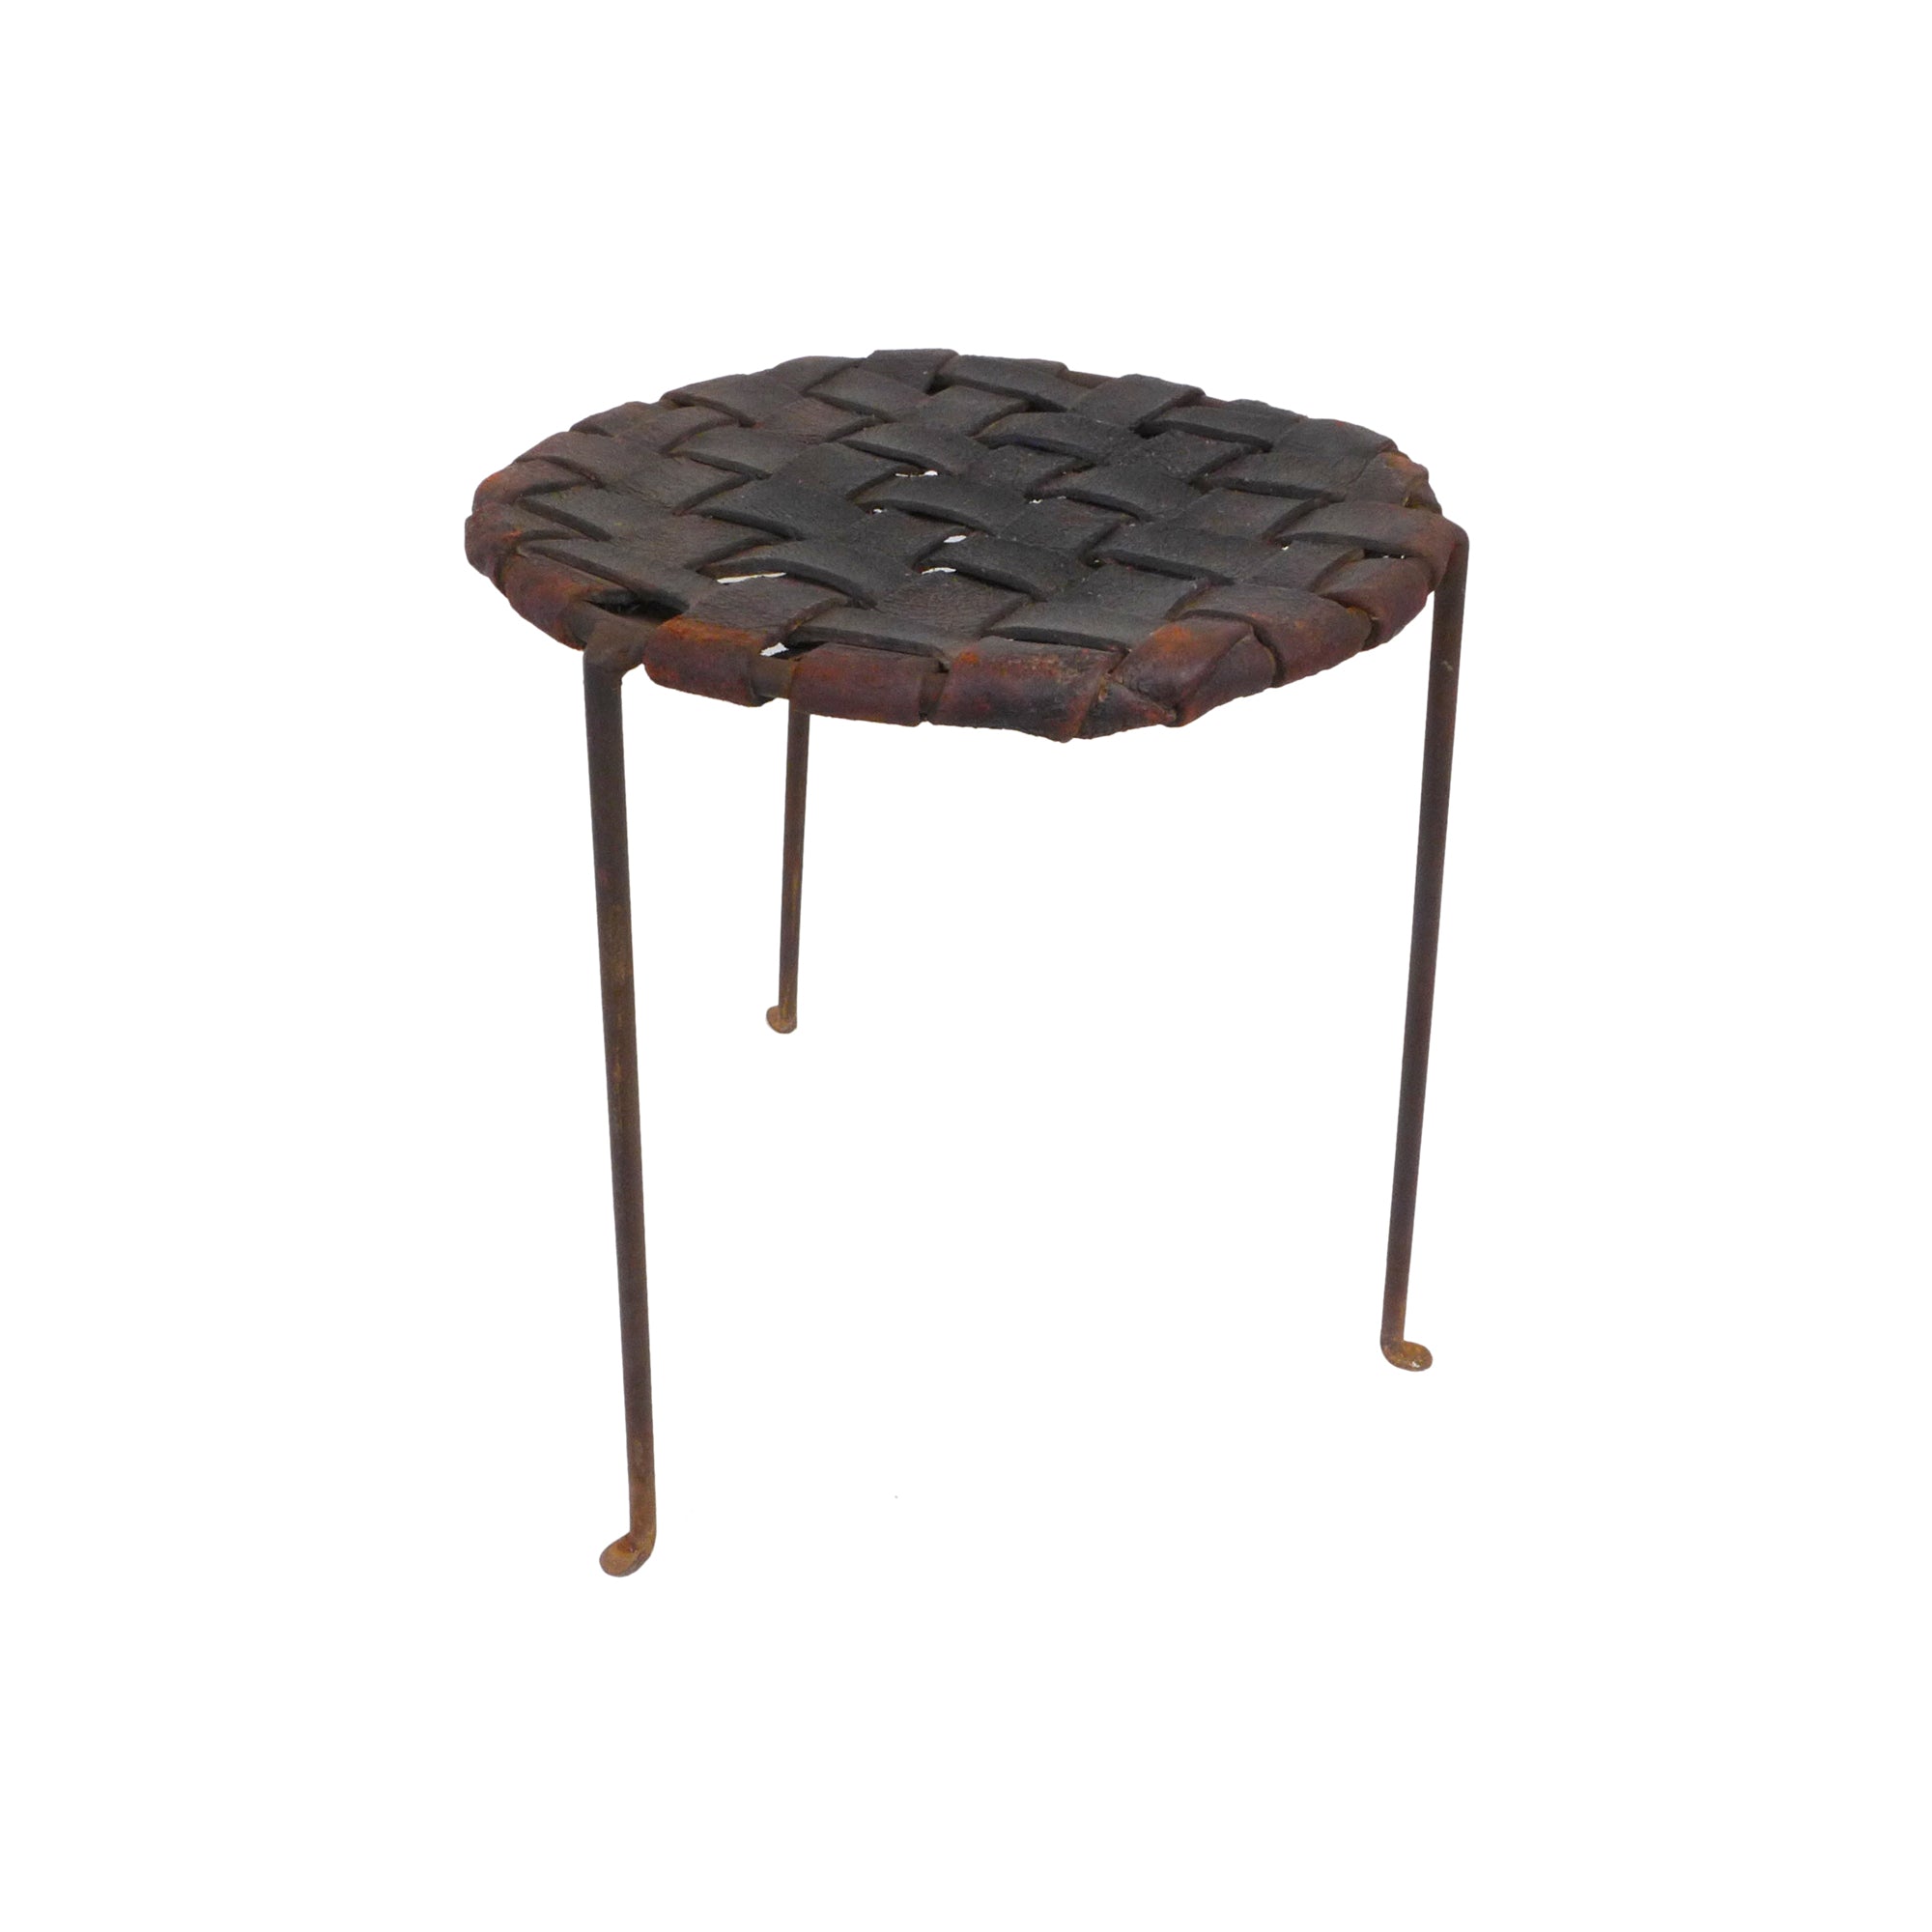 Pair of Iron & Woven Leather “Hippie” Stools by Swift & Monell